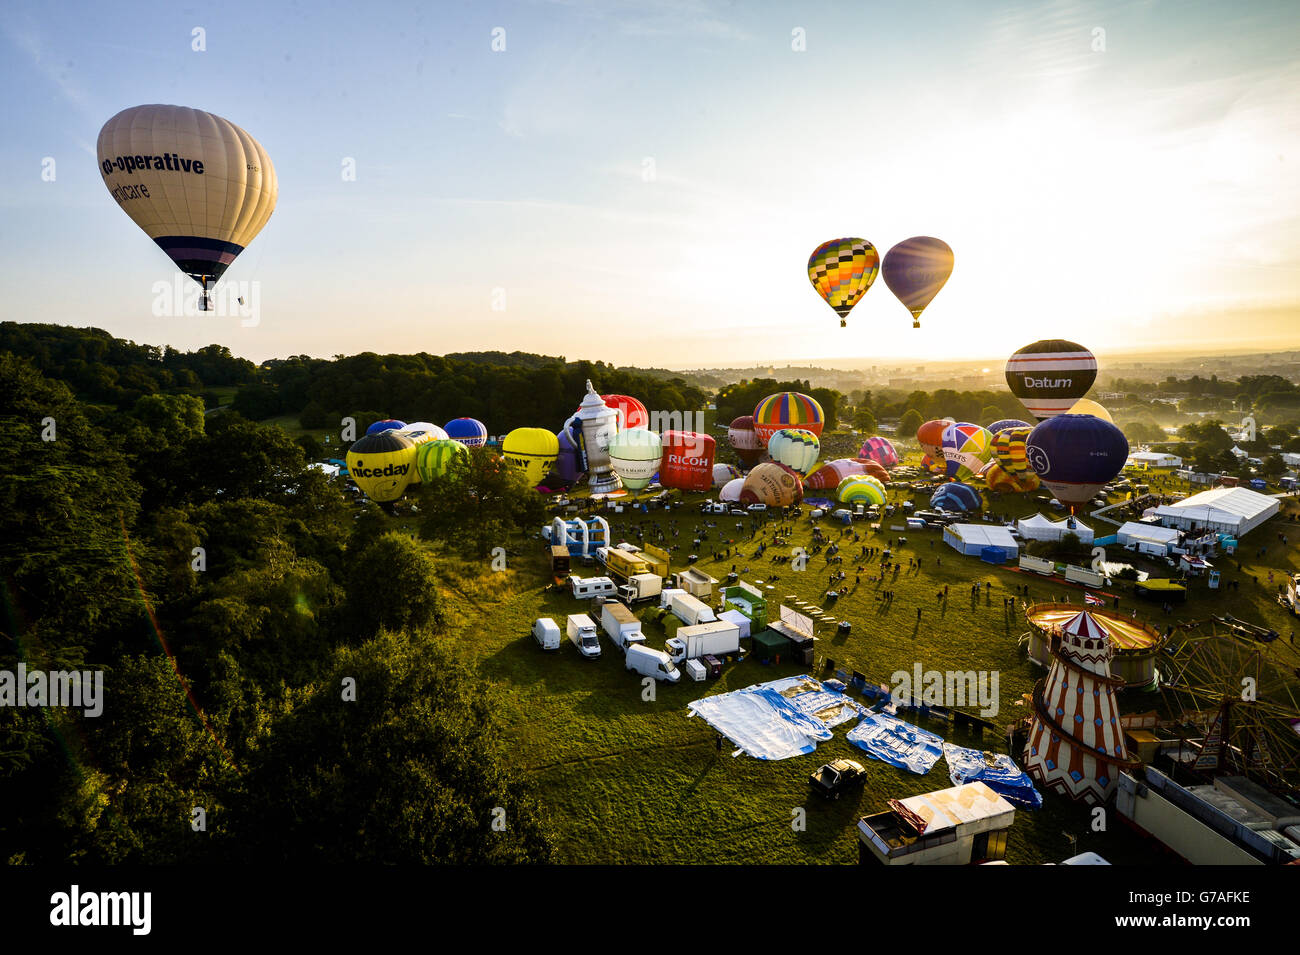 Hot air balloons lift off during a mass ascent at the 36th International Balloon Fiesta at the Ashton Court Estate near Bristol, which is Europe's largest ballooning event. Stock Photo